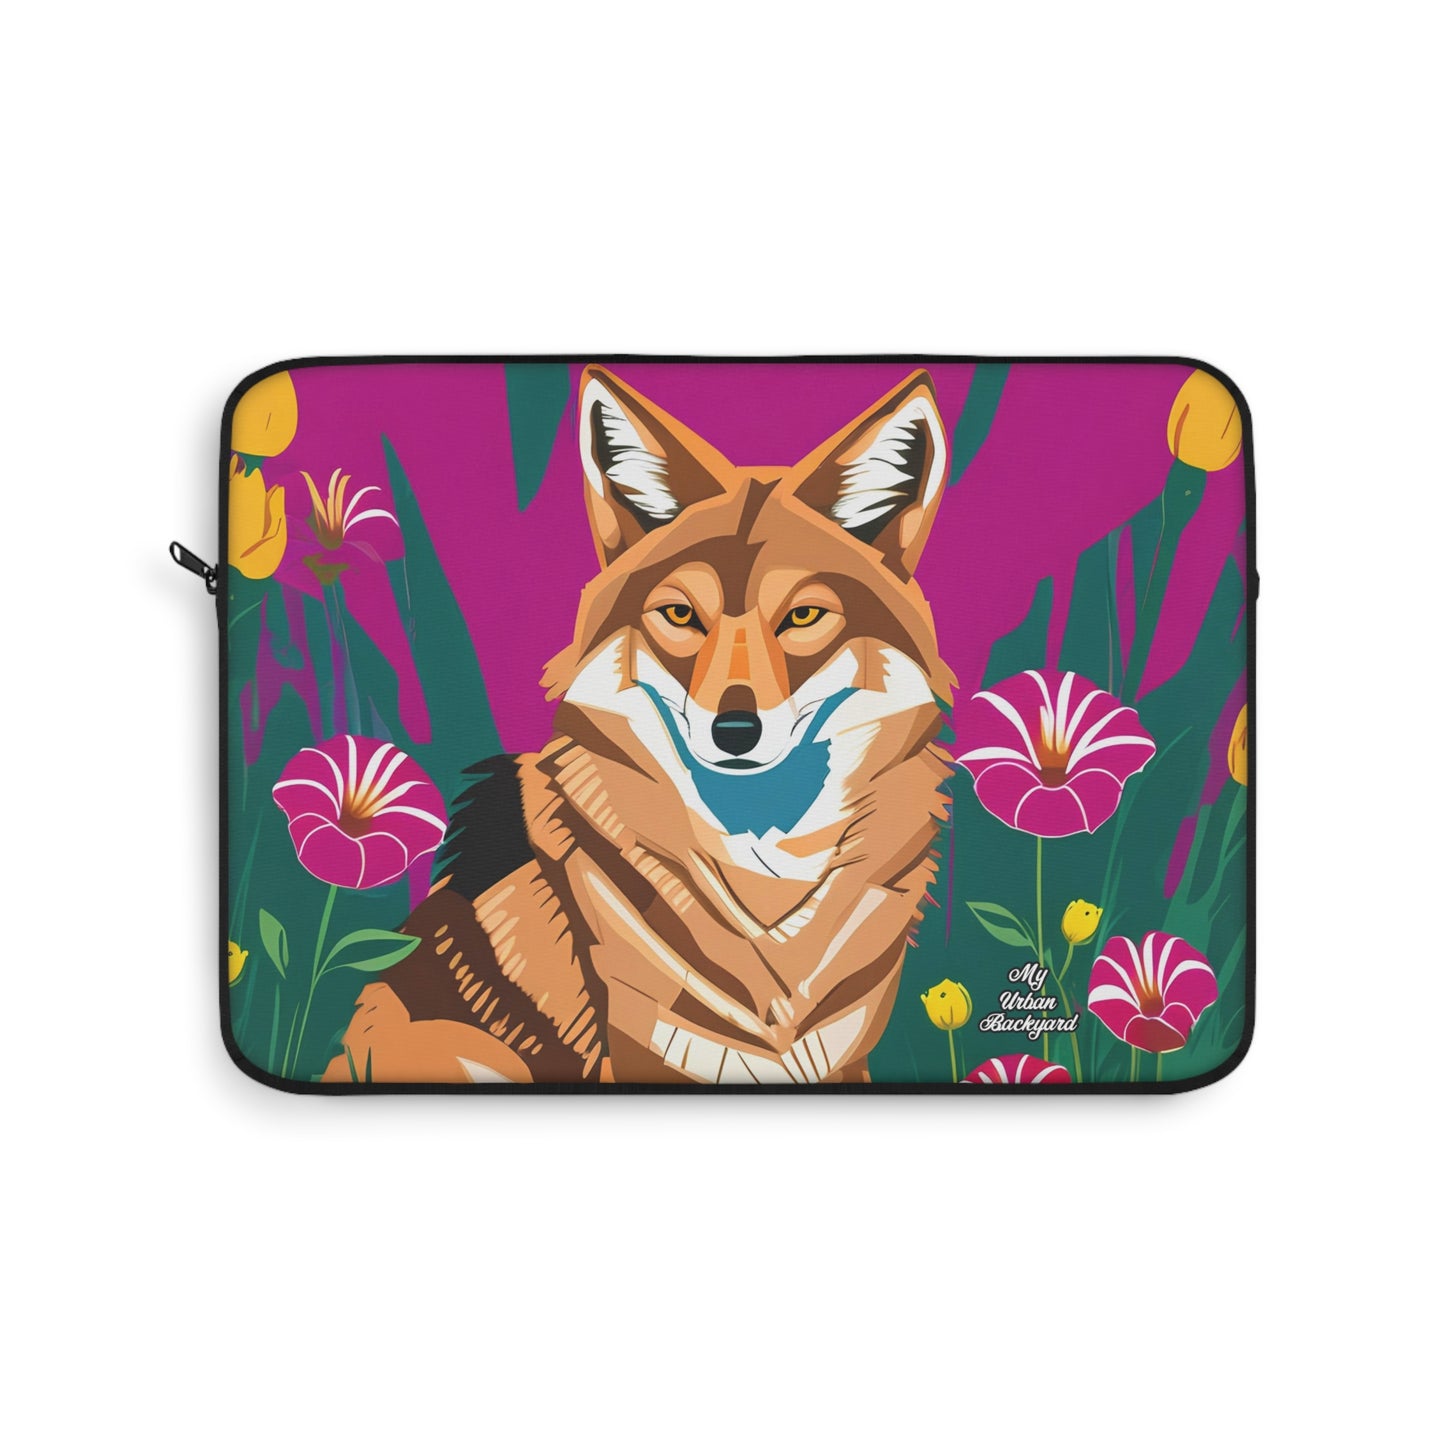 Coyote with Wildflowers, Laptop Carrying Case, Top Loading Sleeve for School or Work